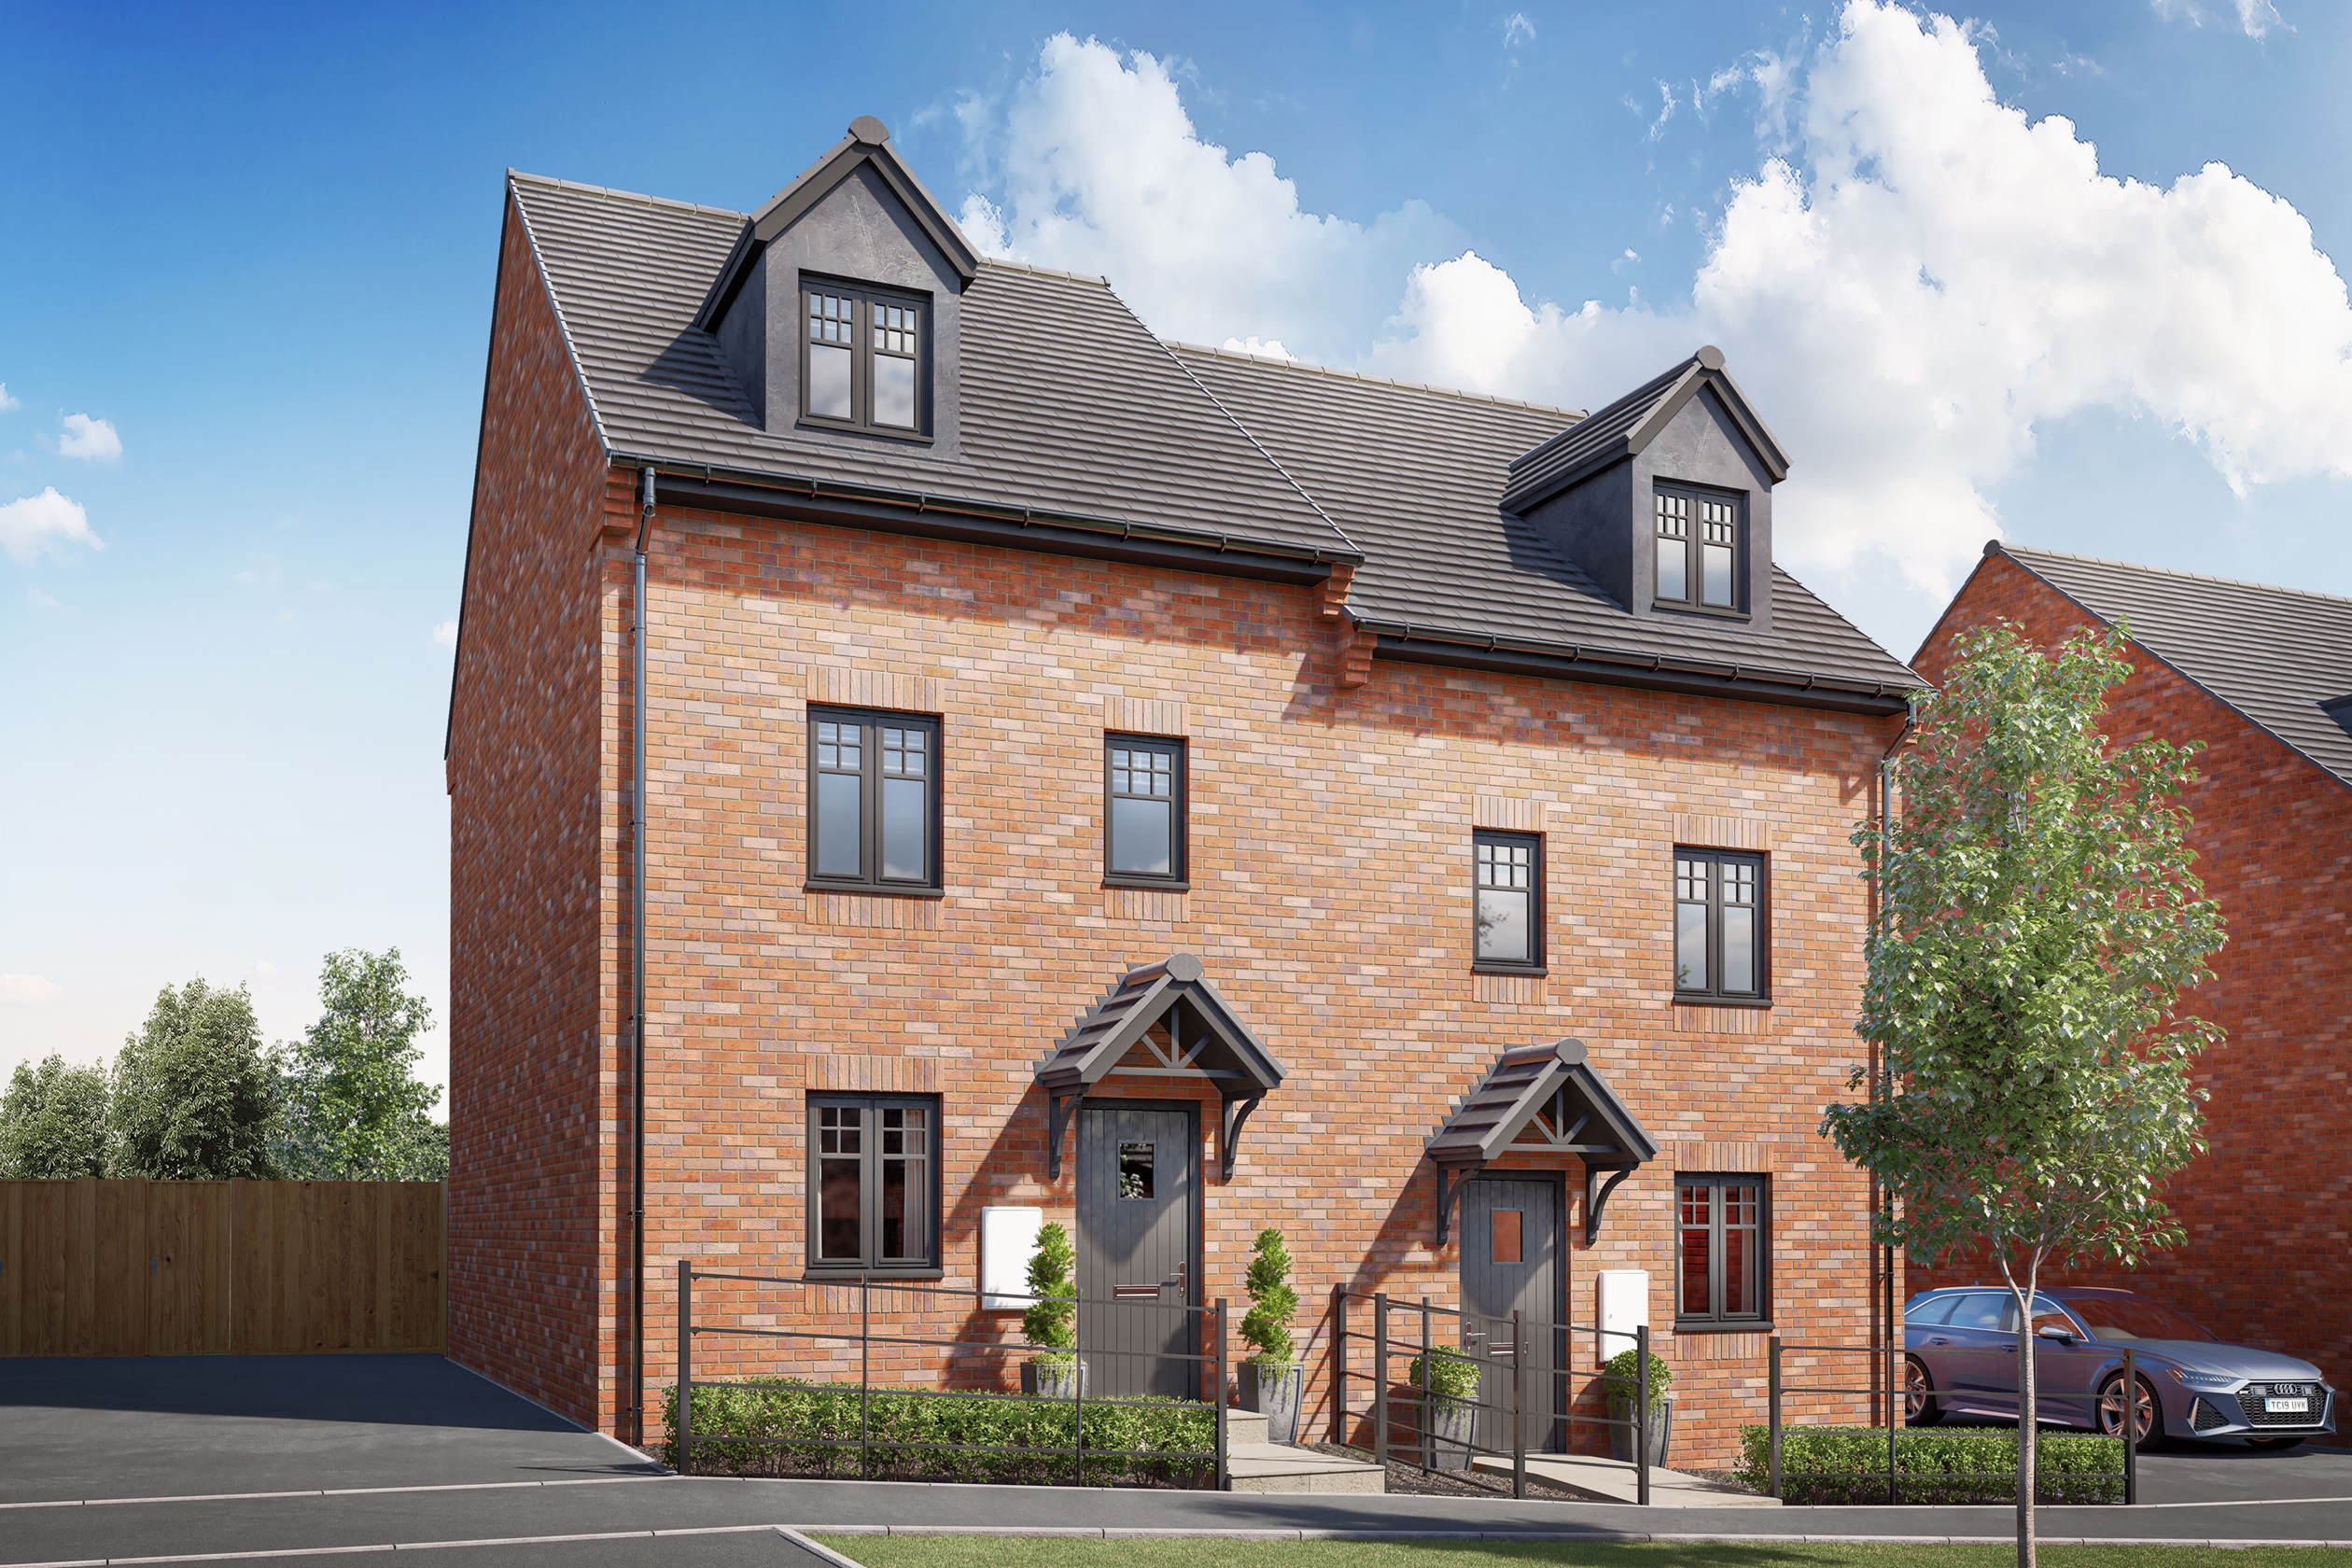 Property 1 of 9. Exterior CGI View Of Our 3 Bed Woodcote Home